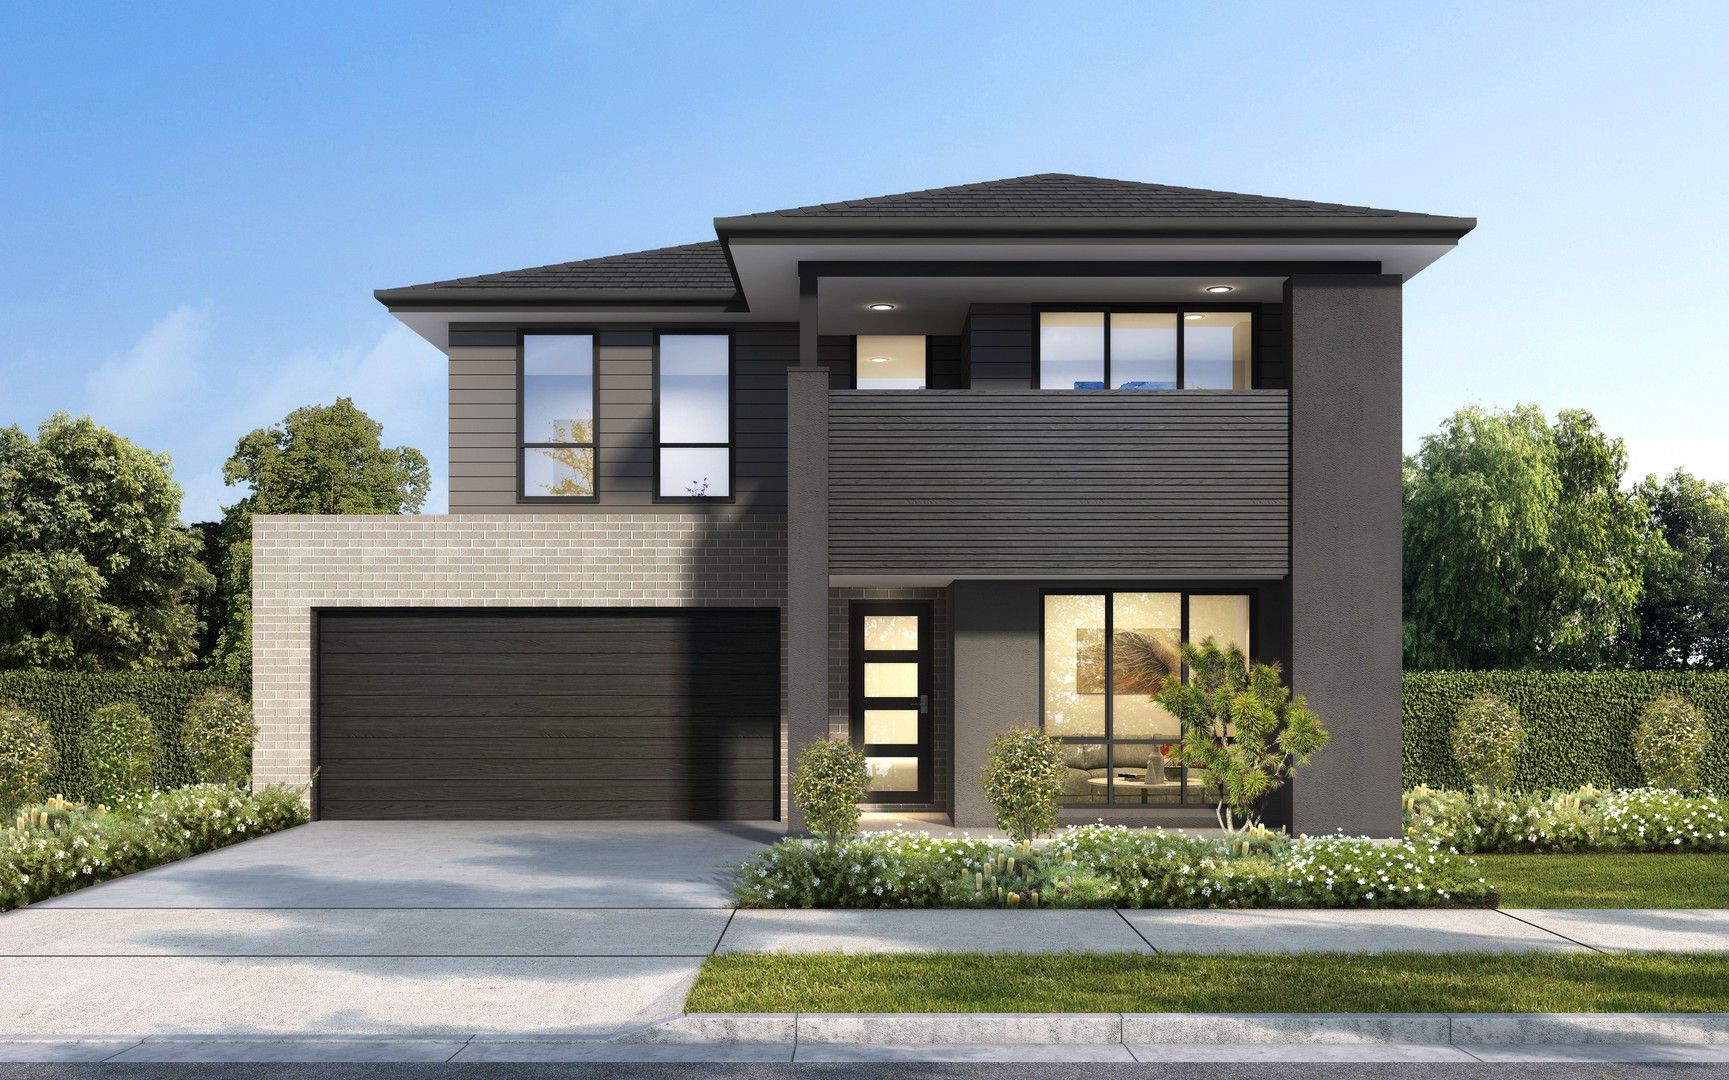 4 bedrooms New House & Land in Lot 123 Road No 4 HORSLEY NSW, 2530